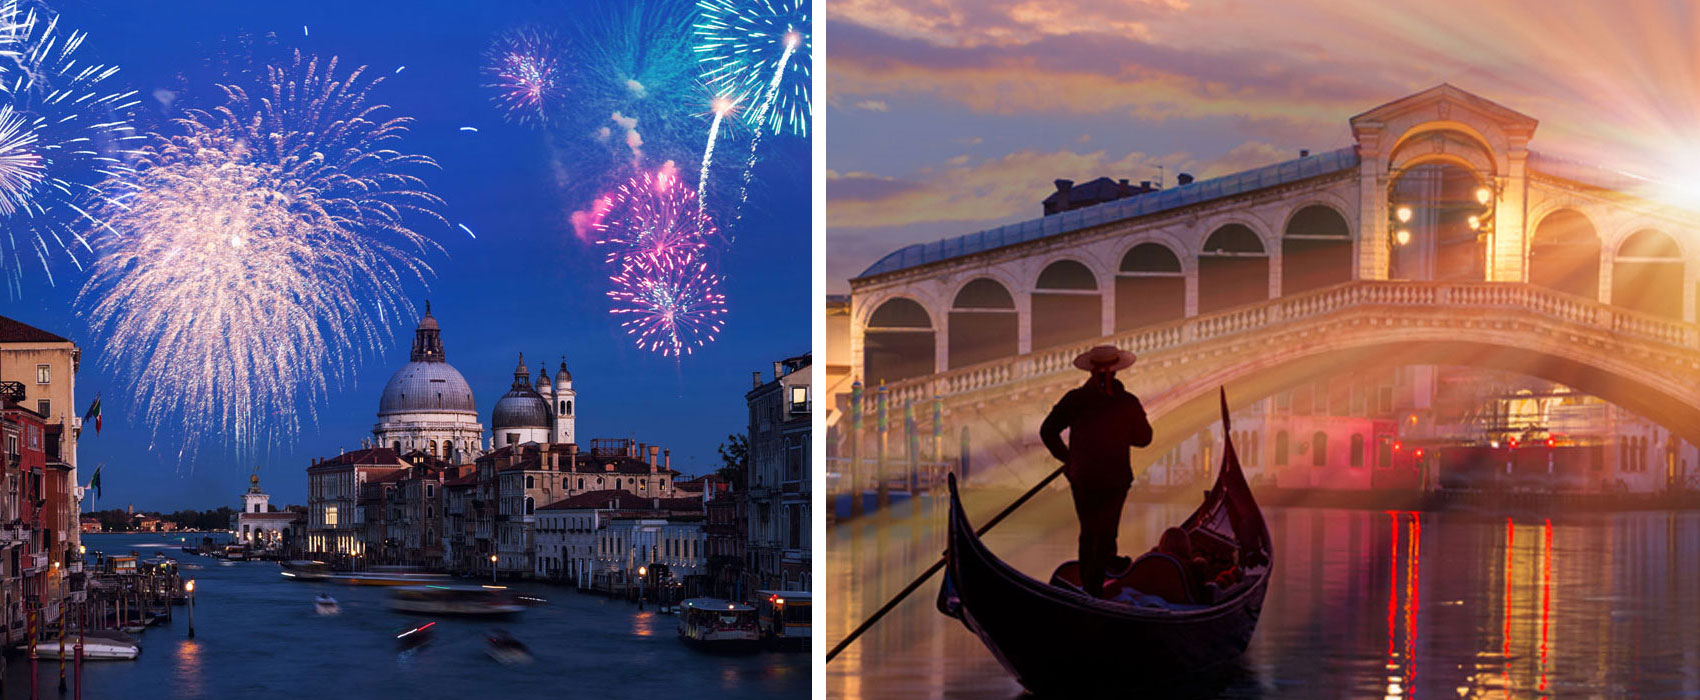 Venice from 29/12 to 1/1: New Year's Eve in Venice